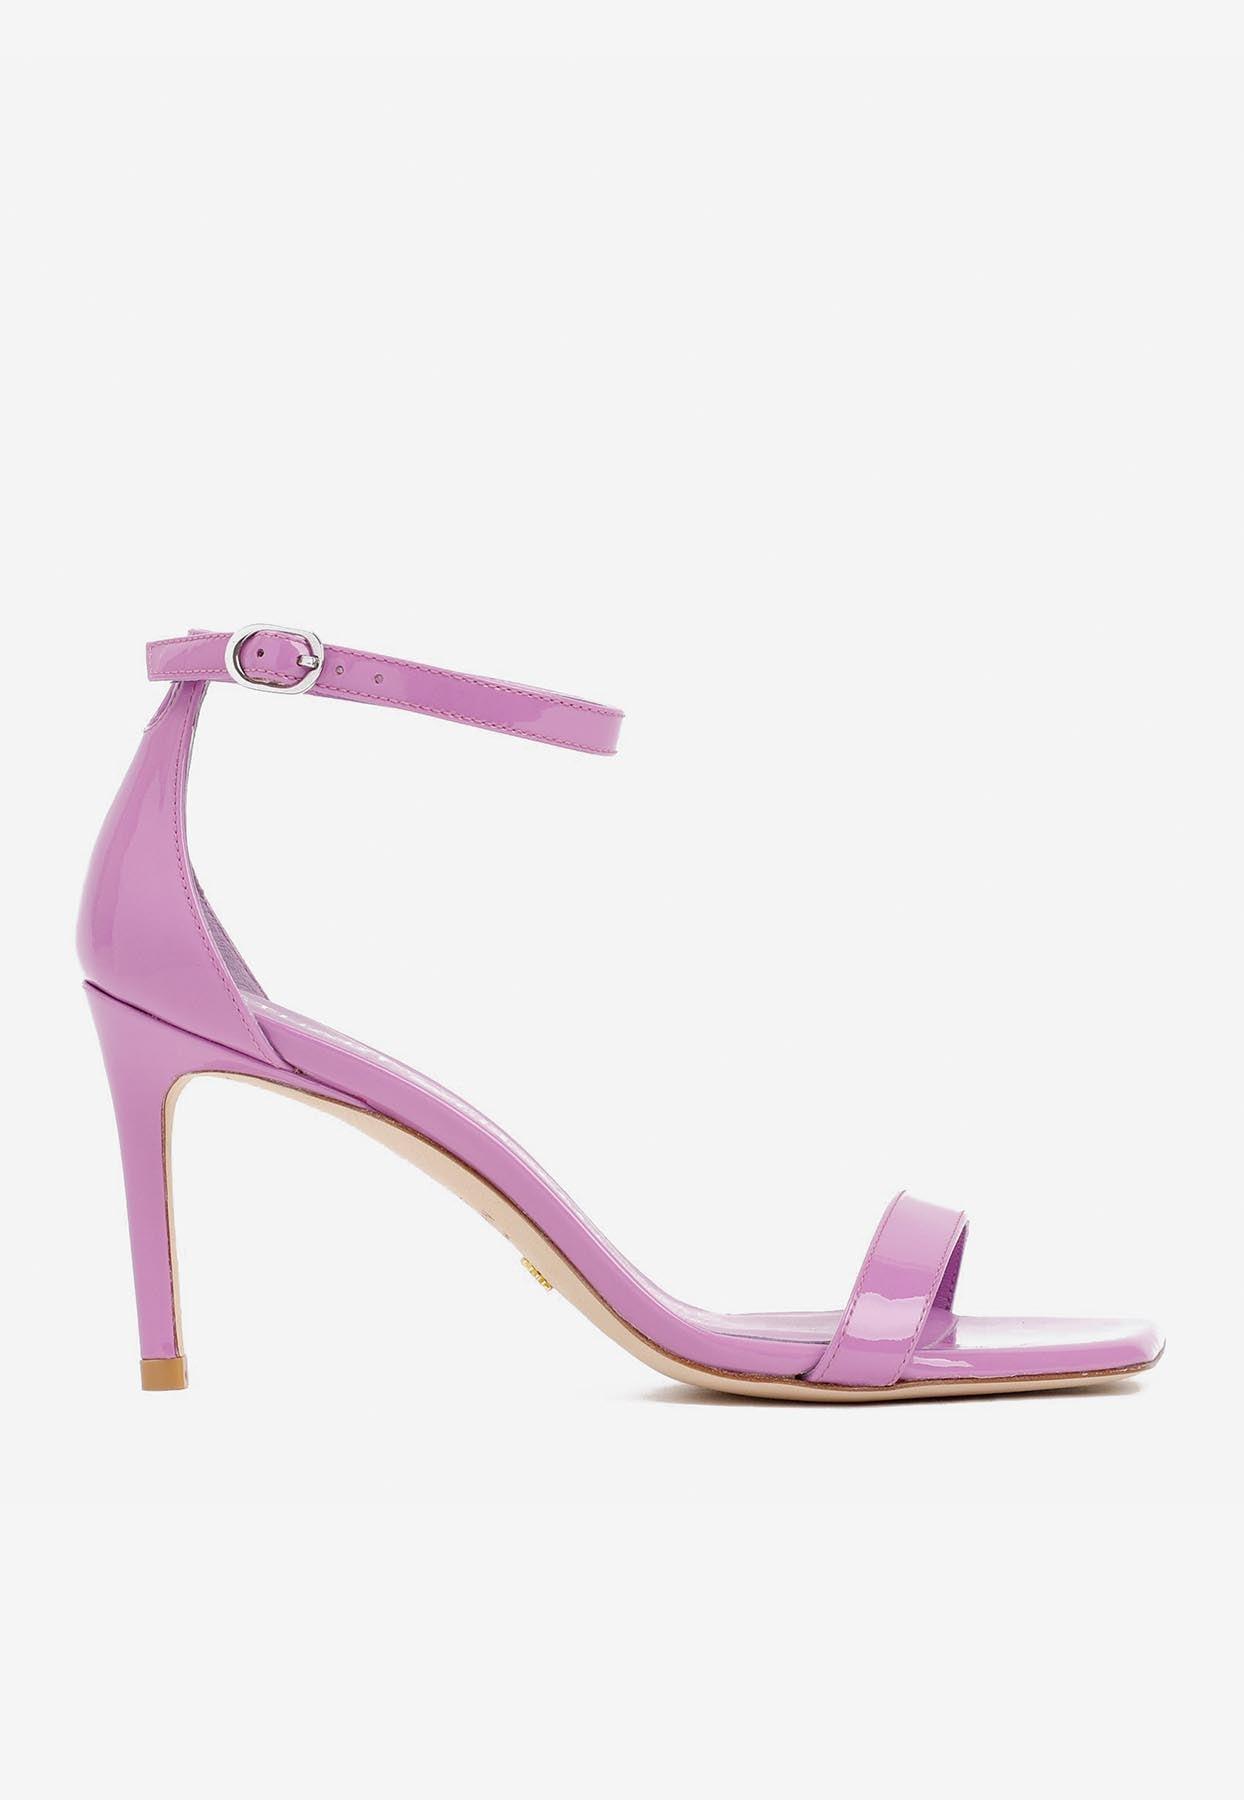 Stuart Weitzman Nunakedcurve 85 Sandals In Patent Leather in Pink | Lyst UK